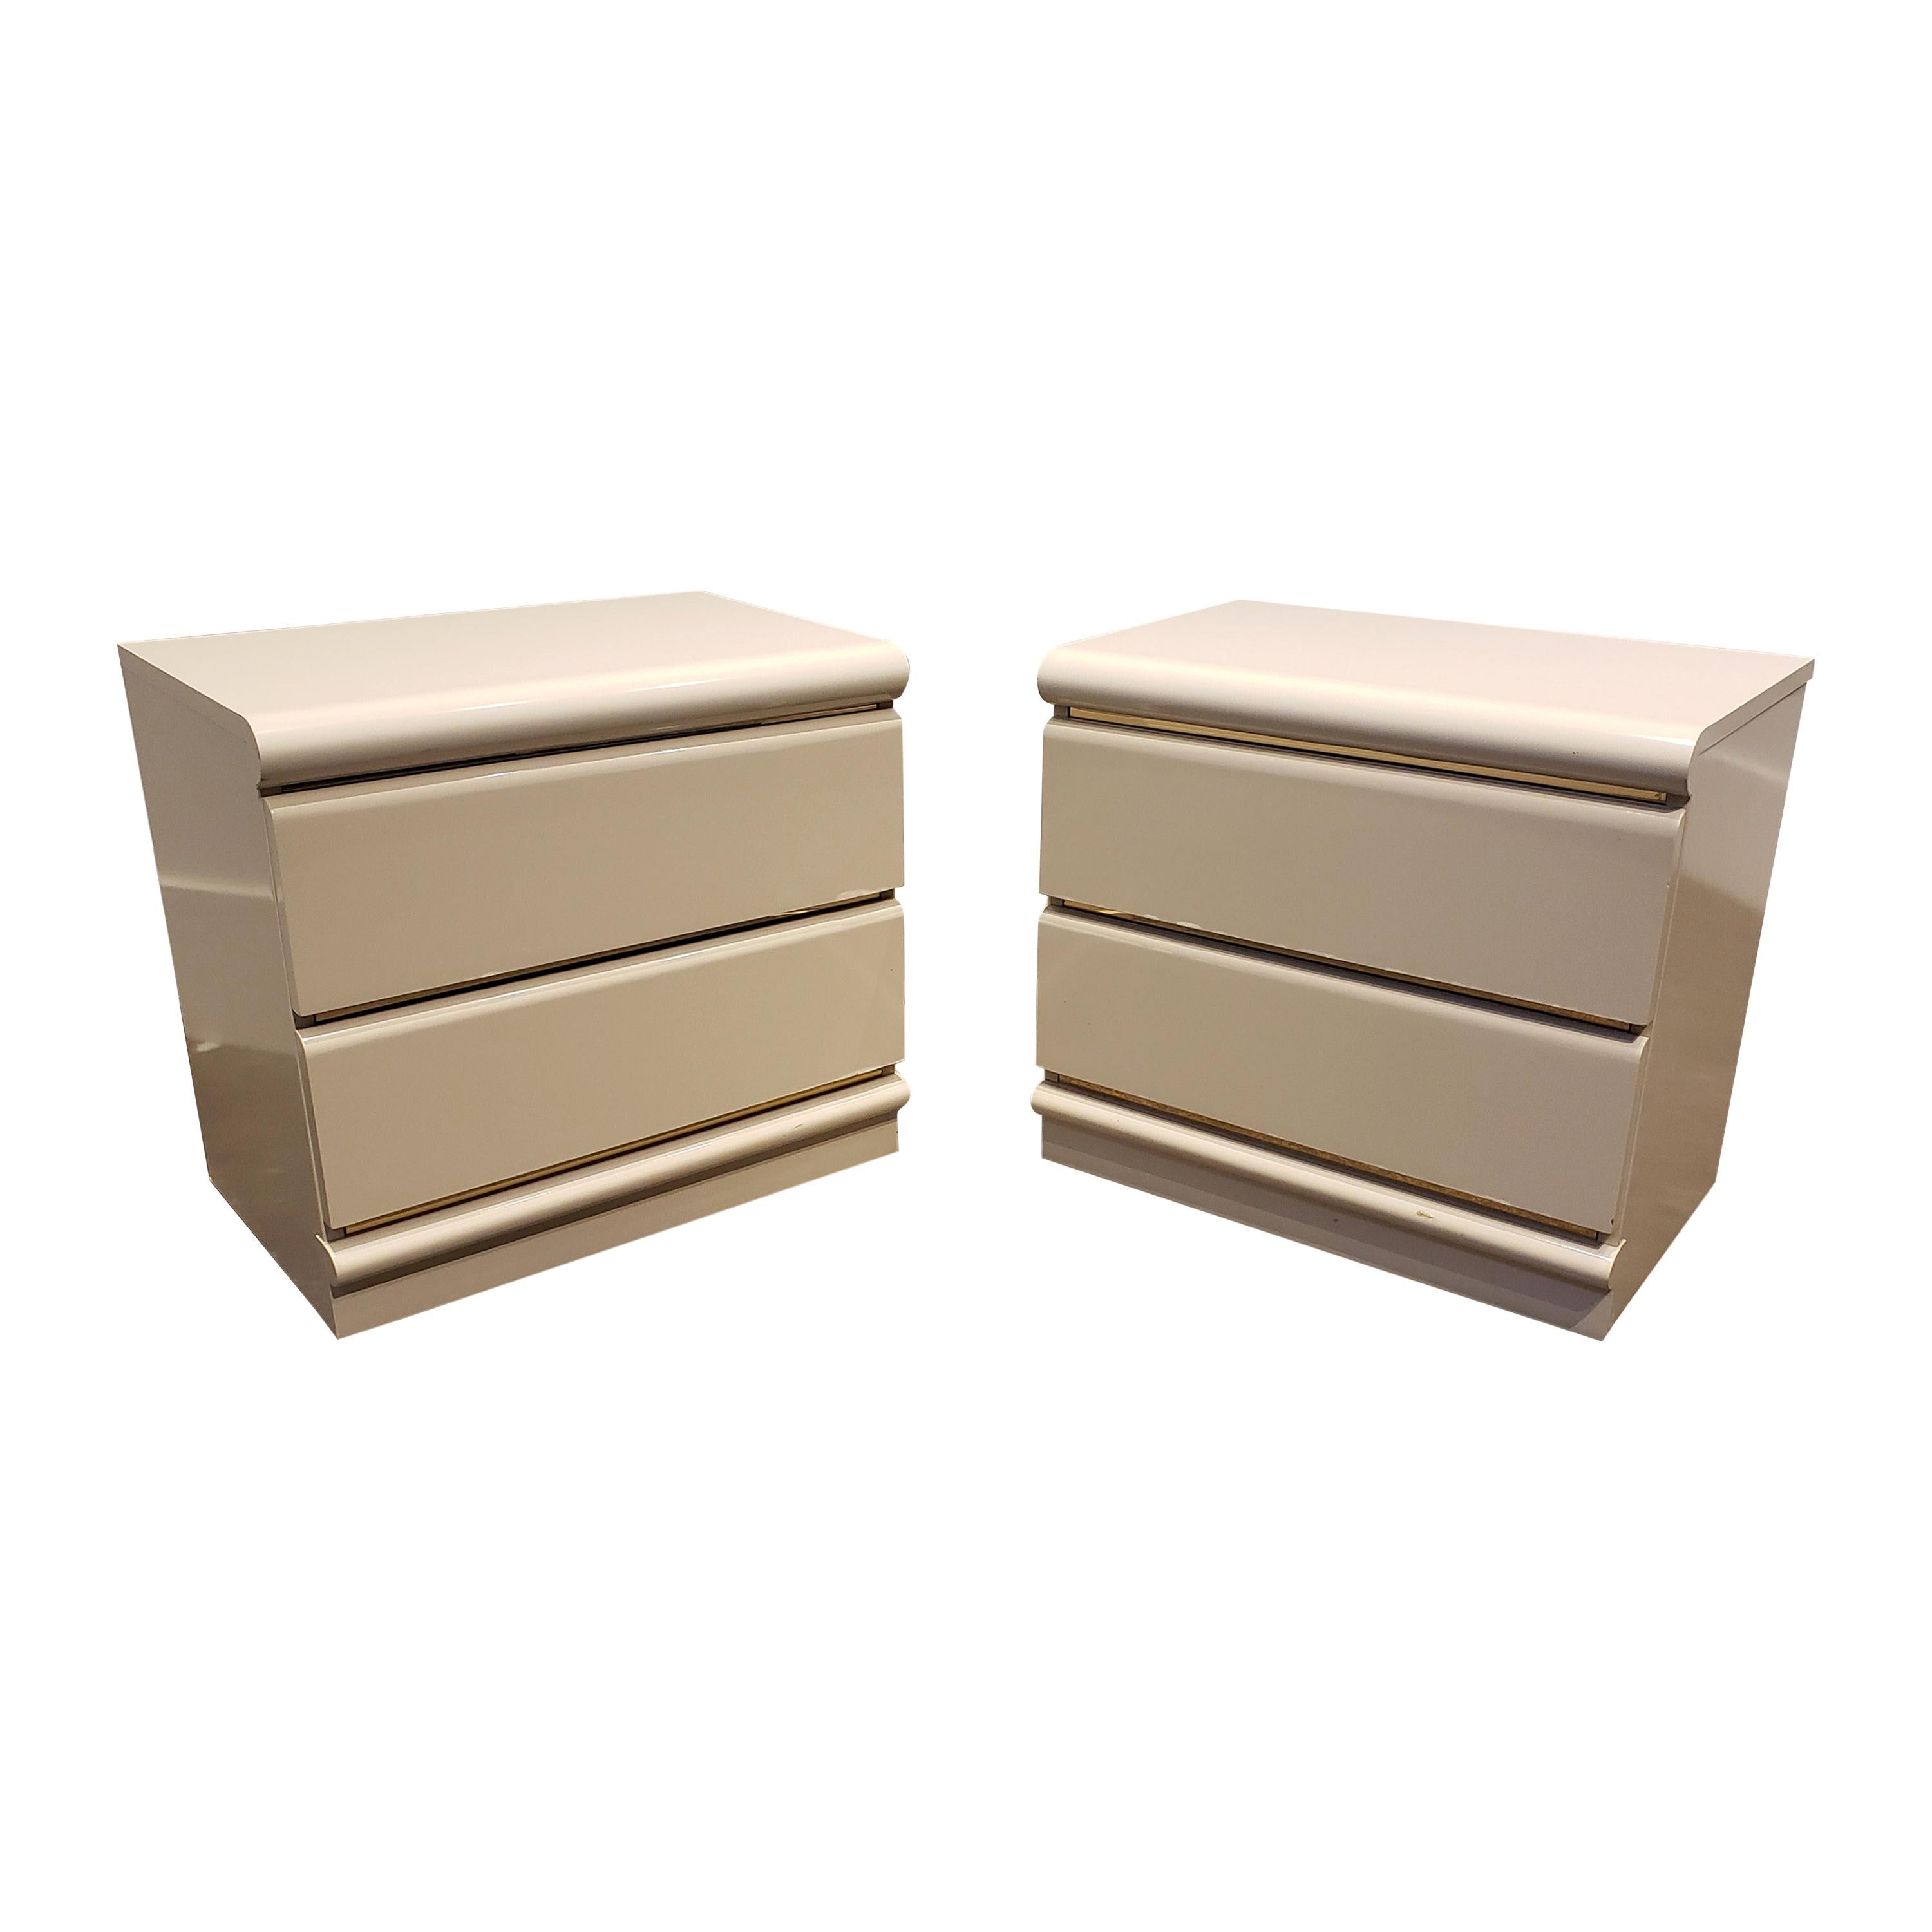 Pair of 1970s Space Age White Lacquered Nightstands by Broyhill